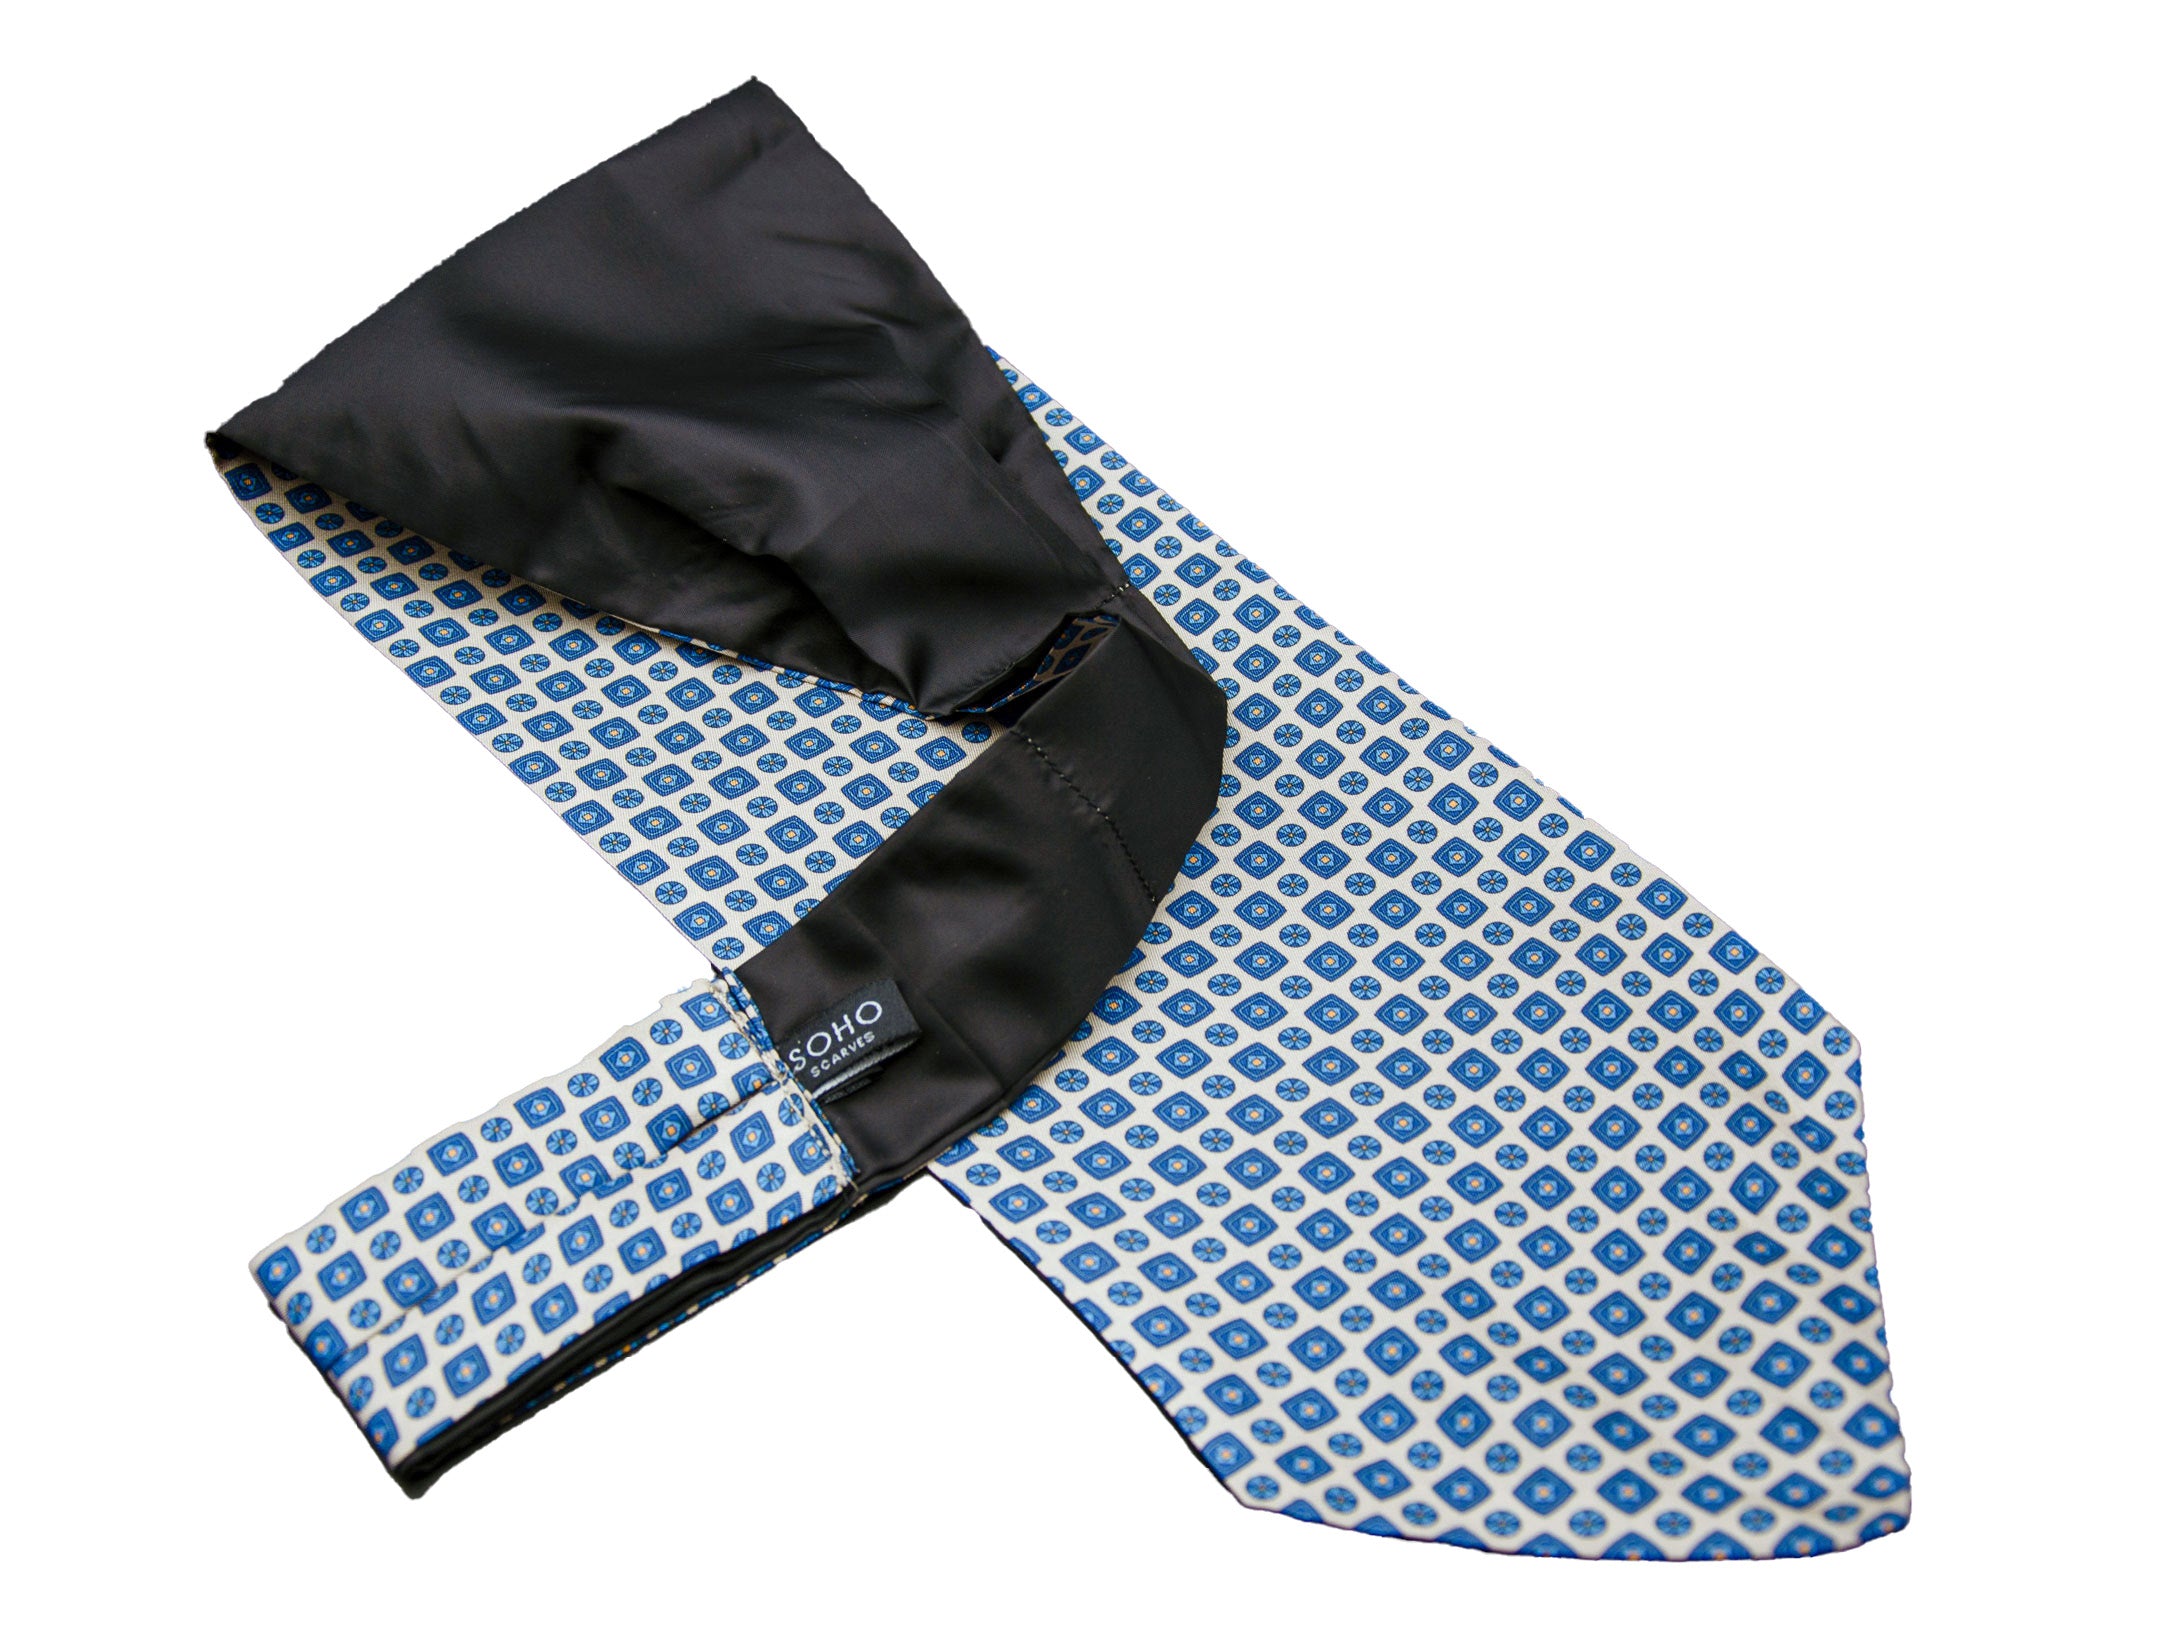 Off-white 'Malaga' single pointed Ascot tie arranged diagonally with wide point in foreground with clear view of blue motifs made up of tiny squares, disks and diamonds.